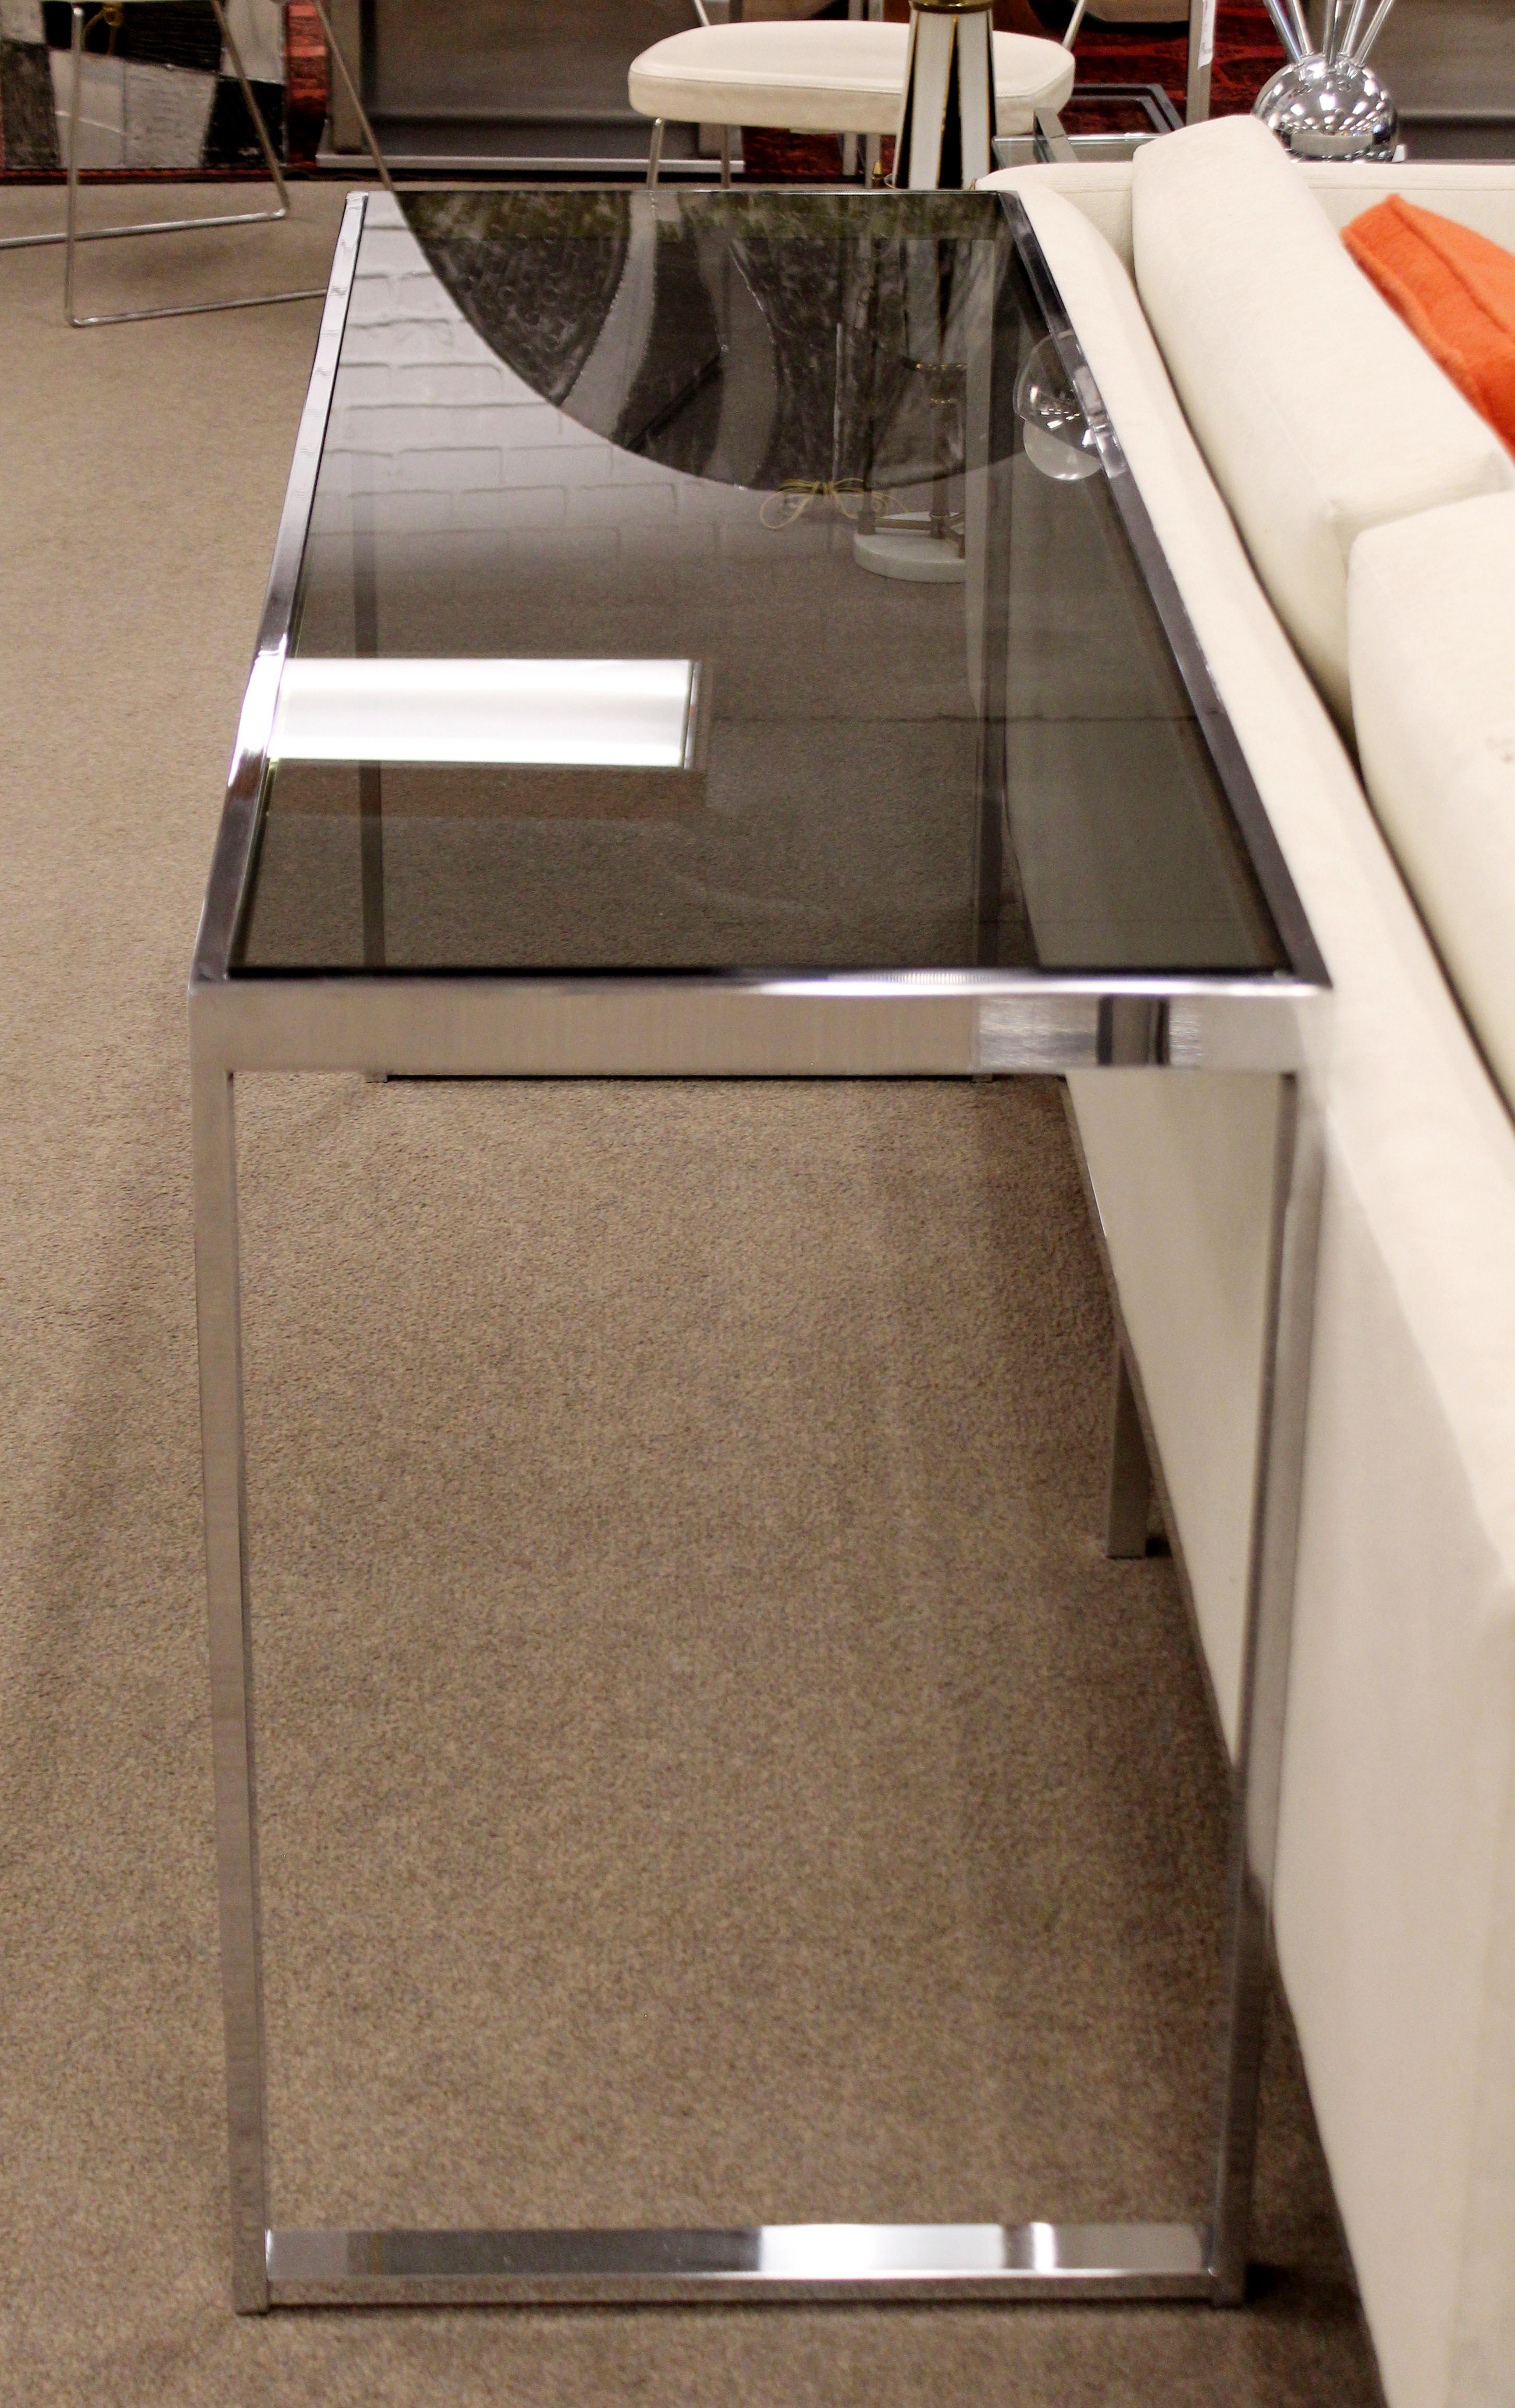 For your consideration is a simple and chic console table, with smoked glass on a flat bar chrome base, by Milo Baughman, circa 1970s. In excellent condition. The dimensions are 60